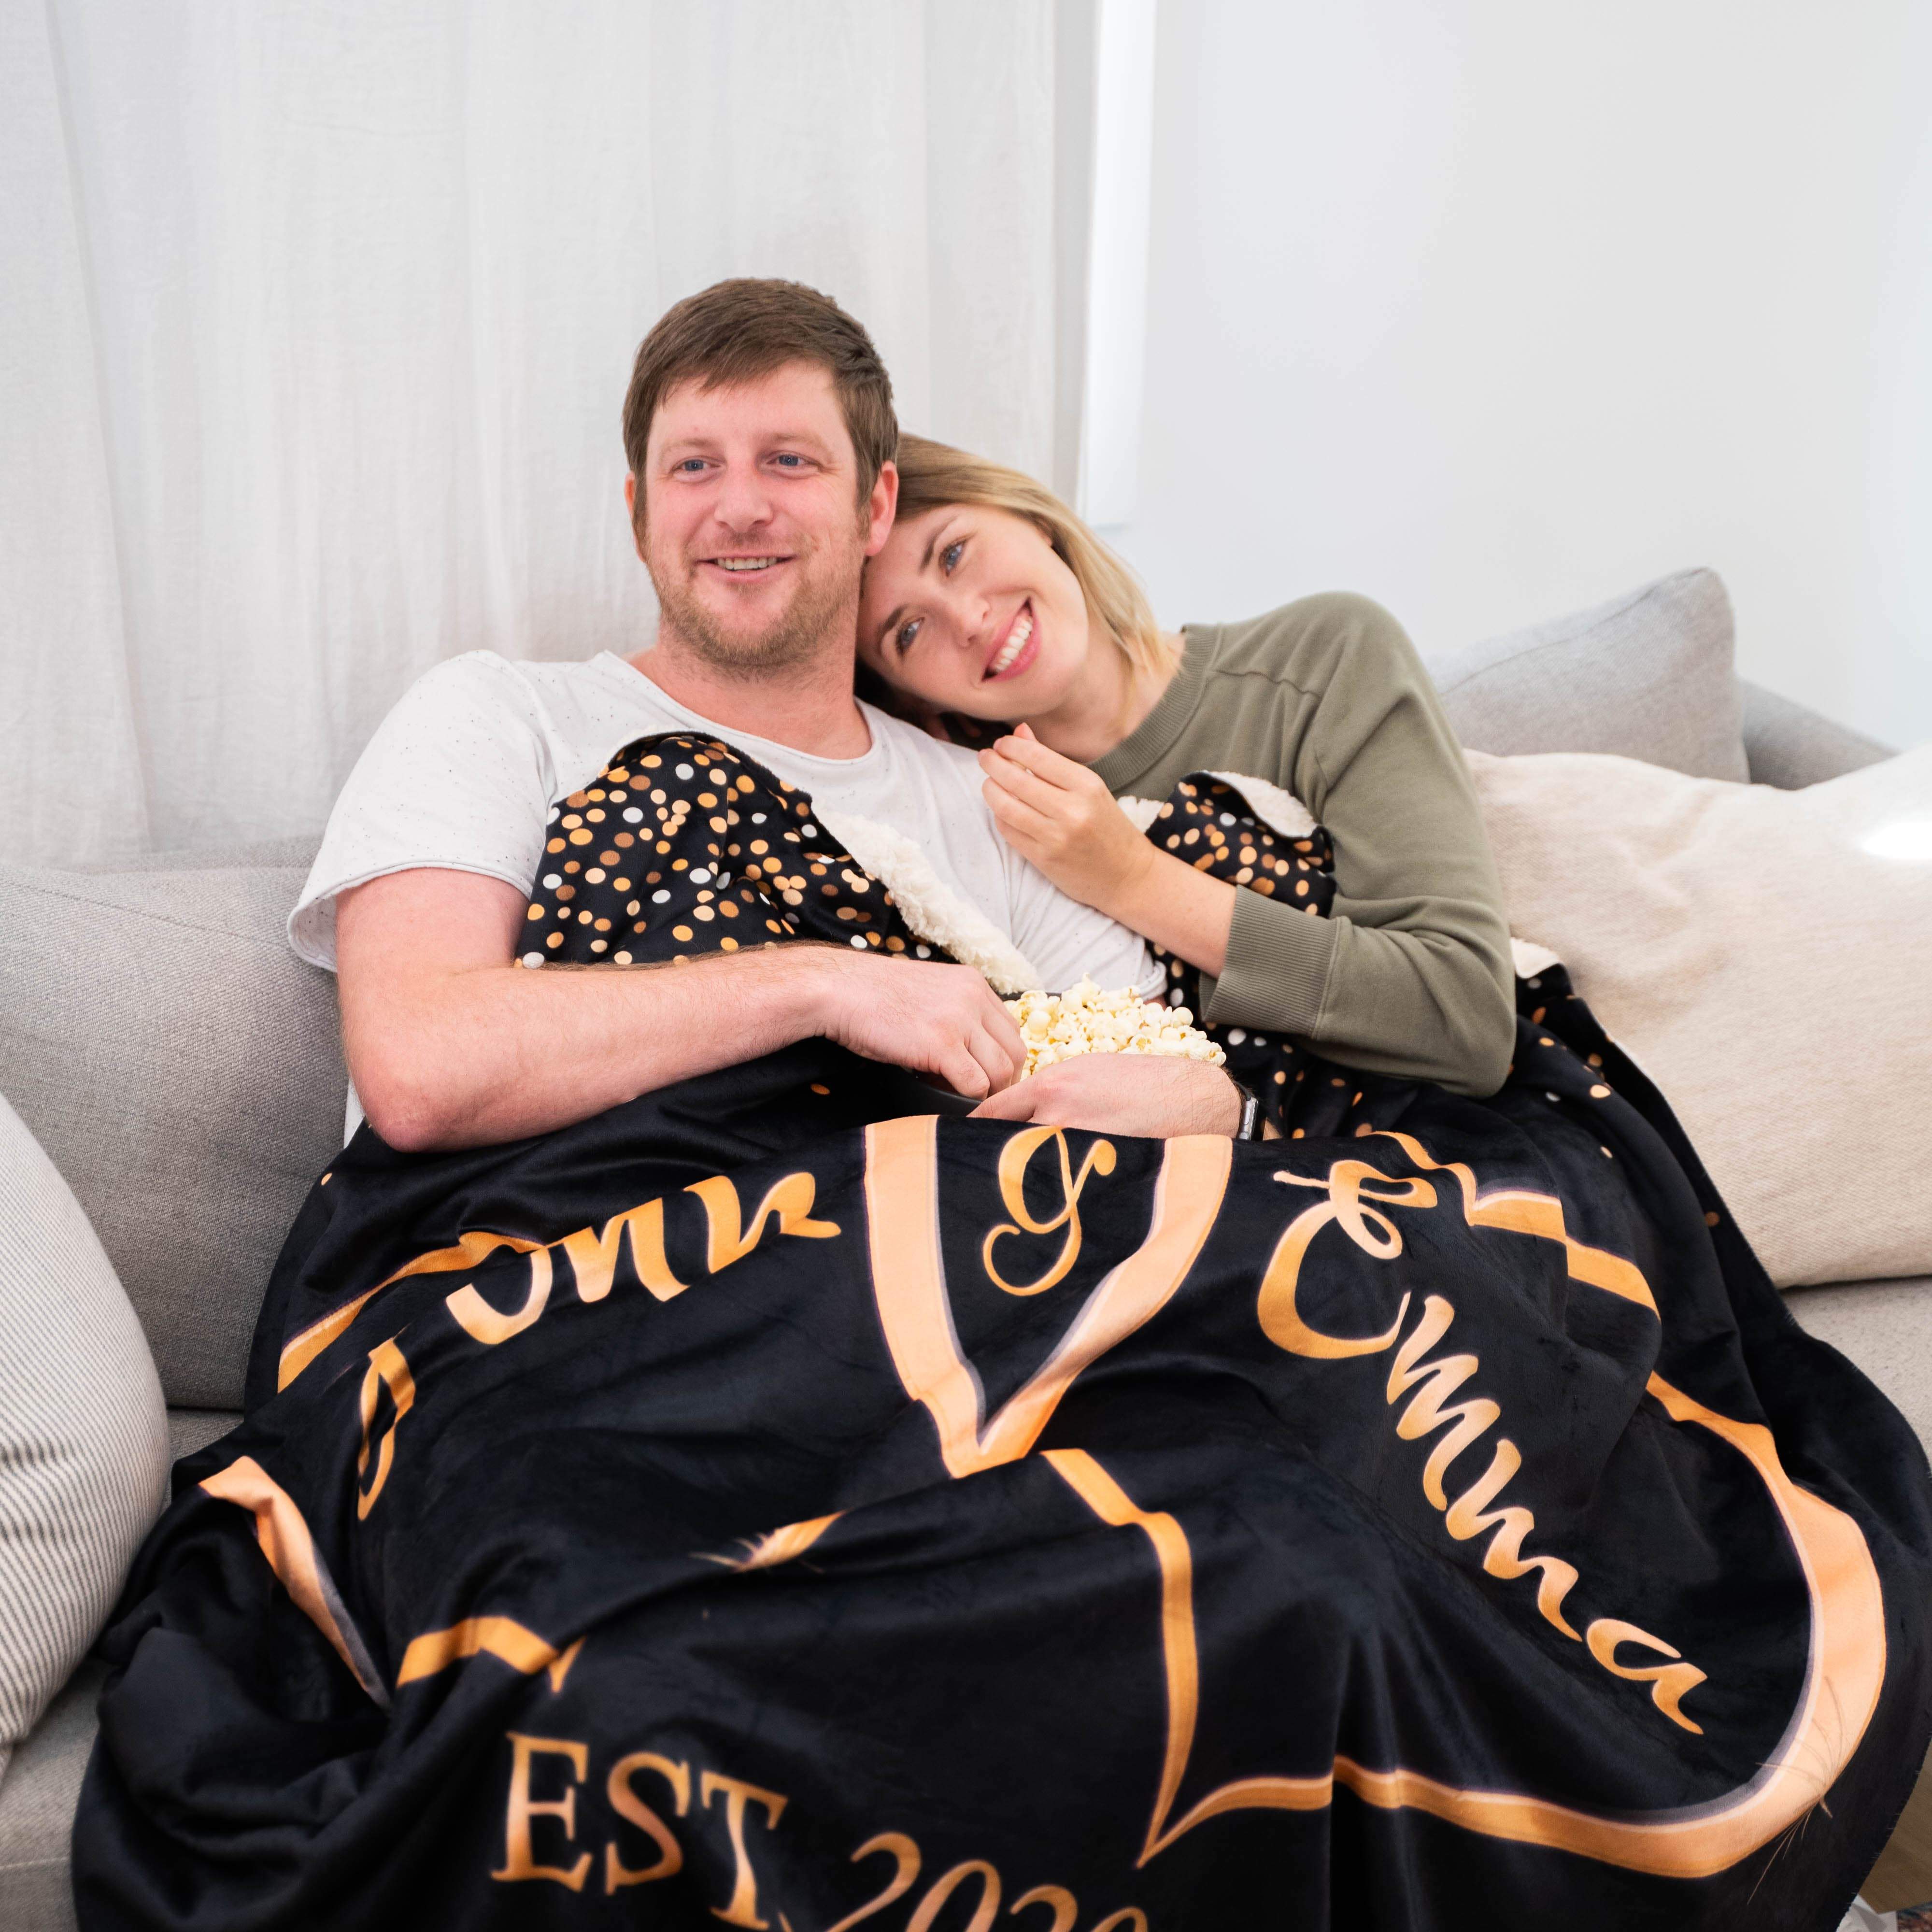 Personalized Passion Personalized Soft and Cozy Blanket for Couples - Gifts  Black - 40x60 Inches